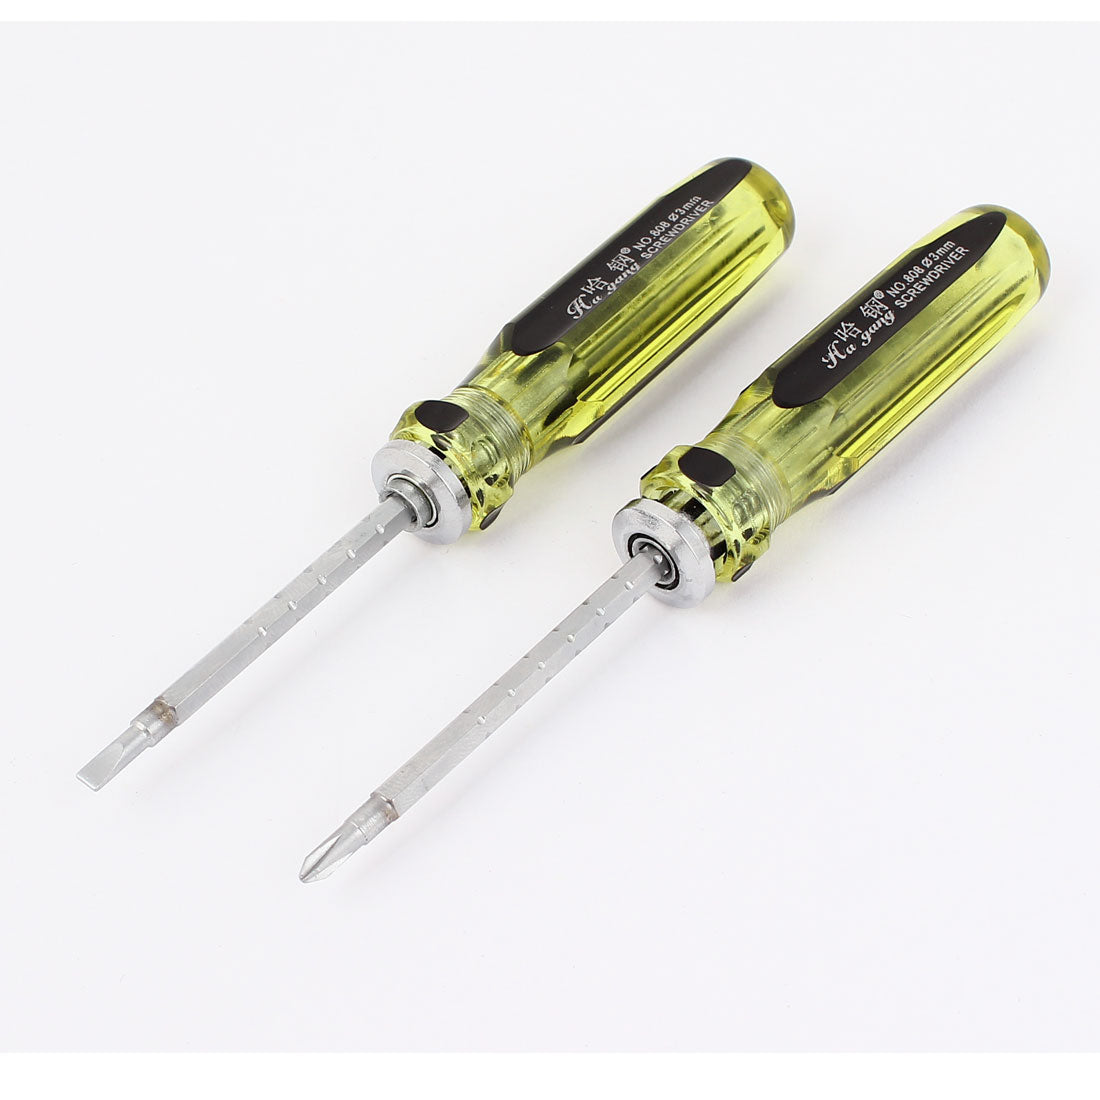 uxcell Uxcell 2pcs Adjustable Length 2 Way 3mm Slotted Phillips Head Screwdriver Repair Tool